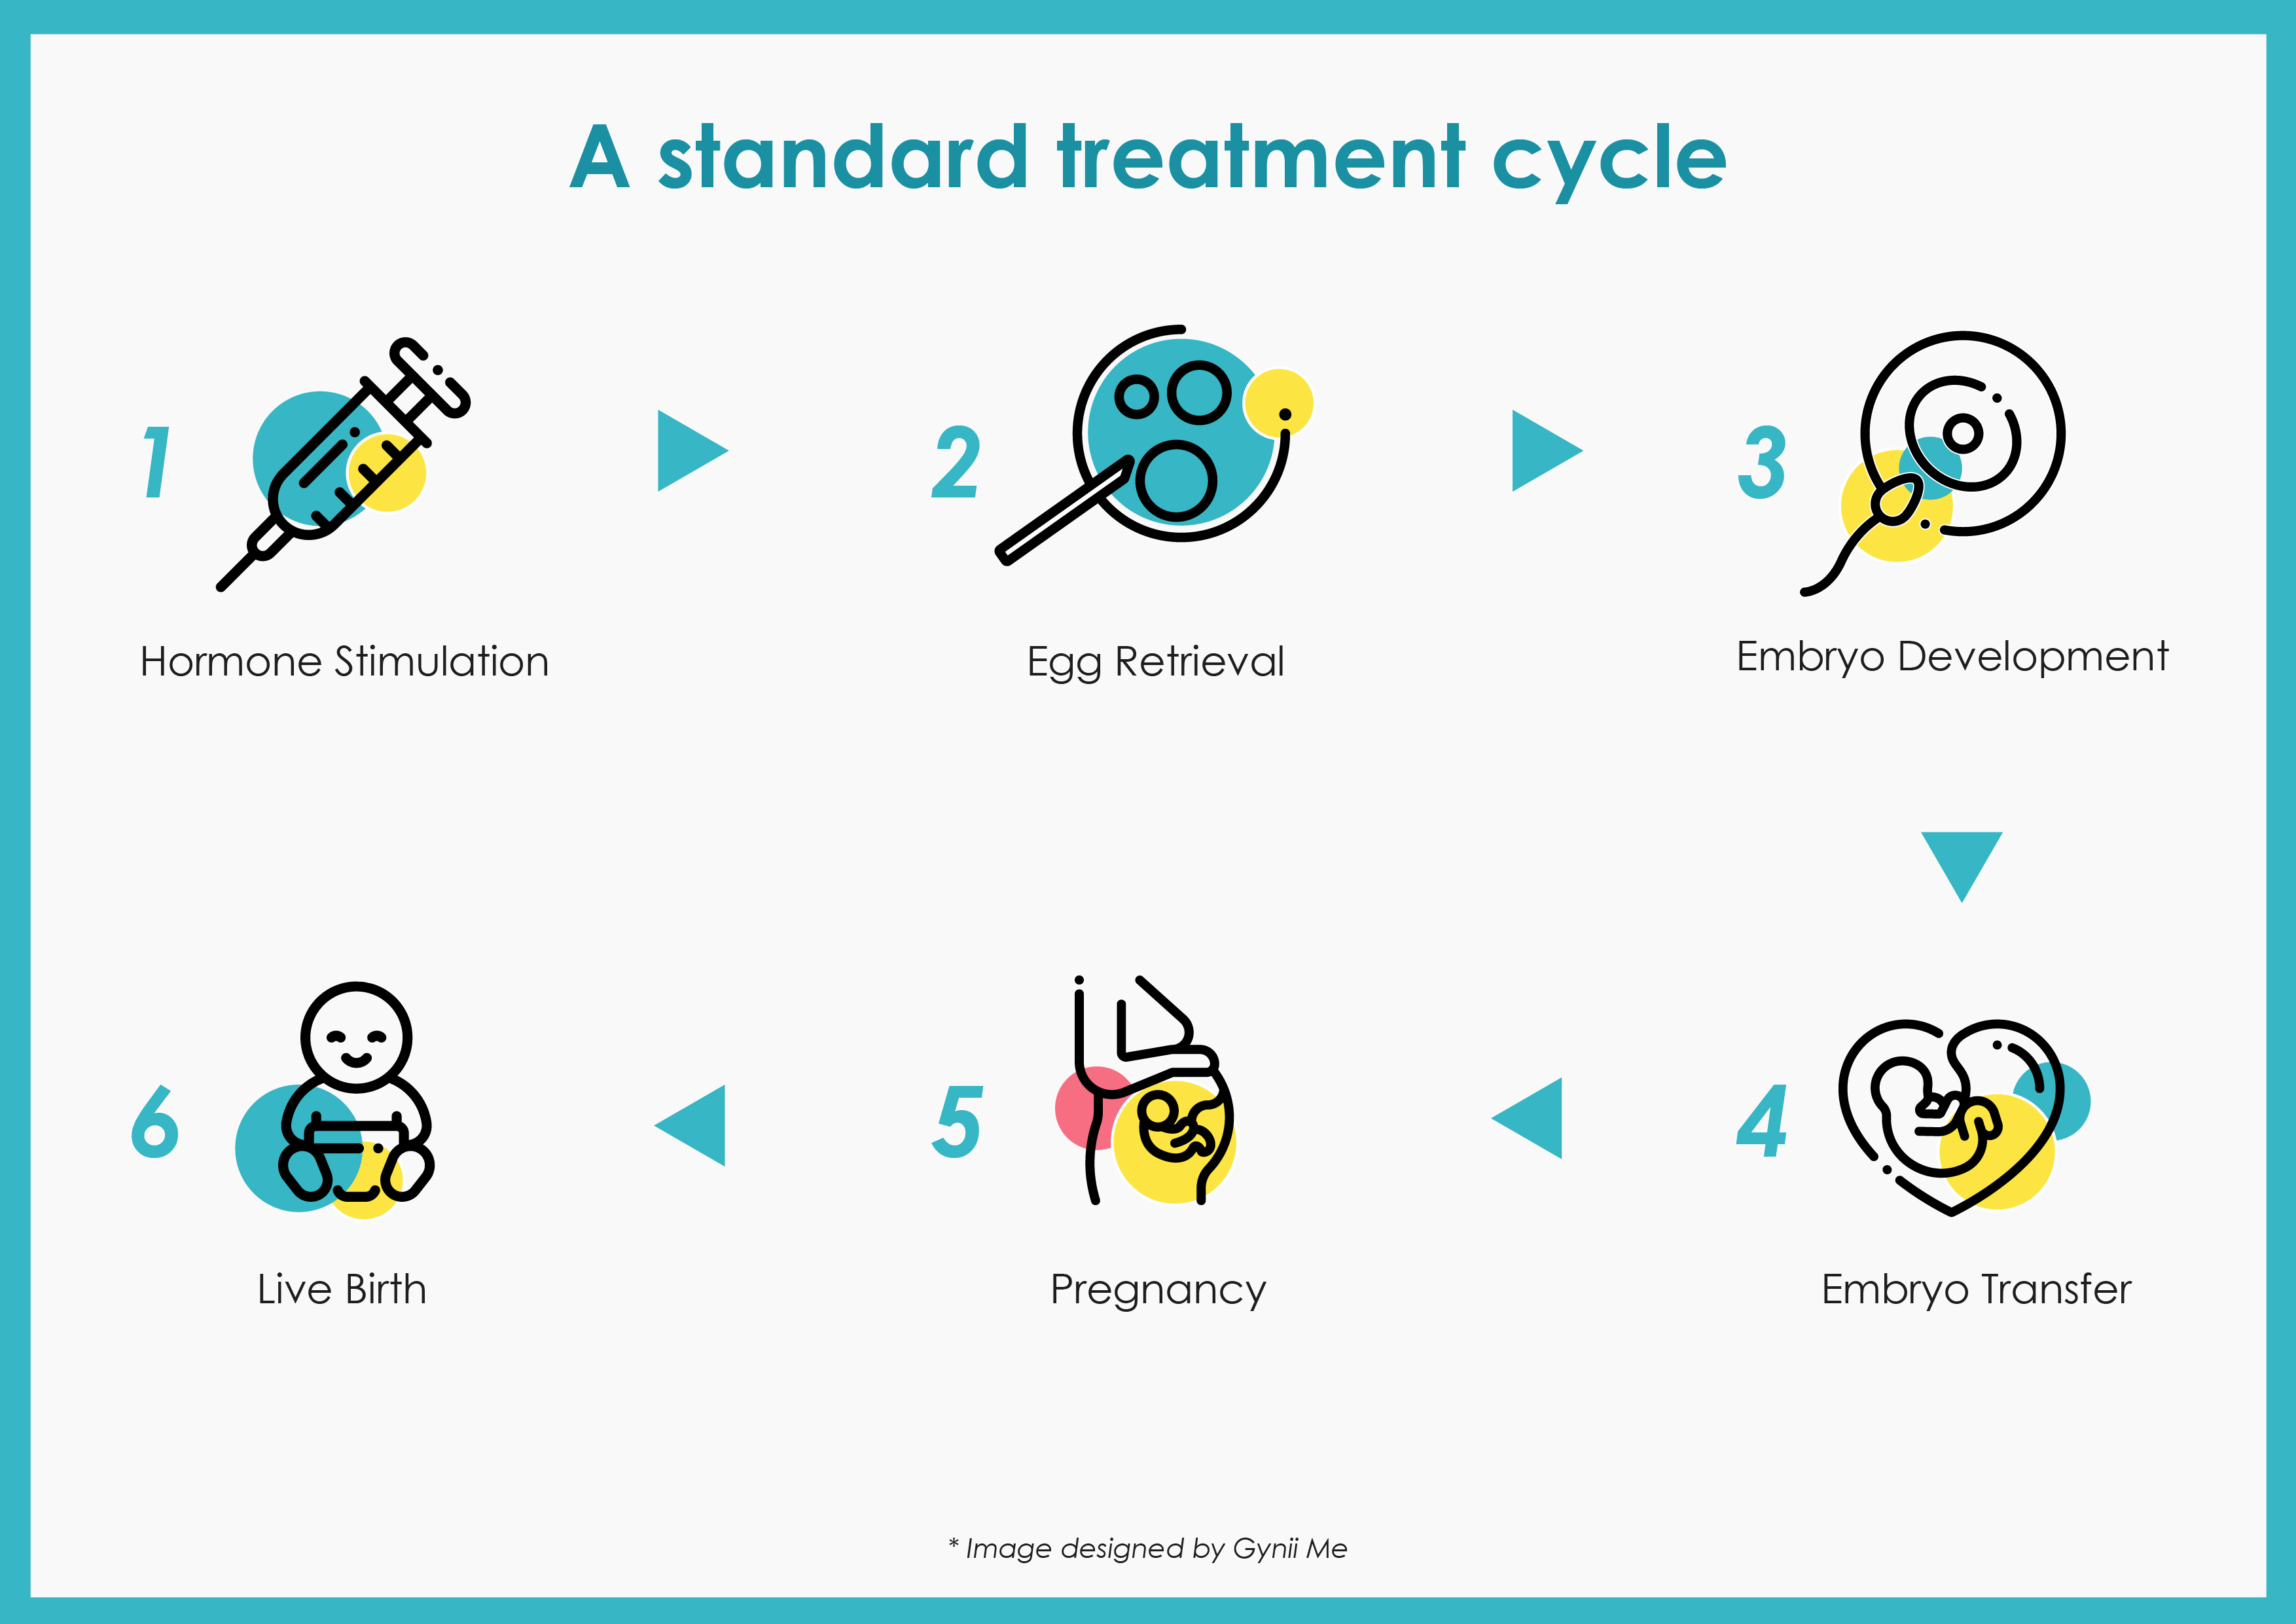 A standard IVF treatment cycle